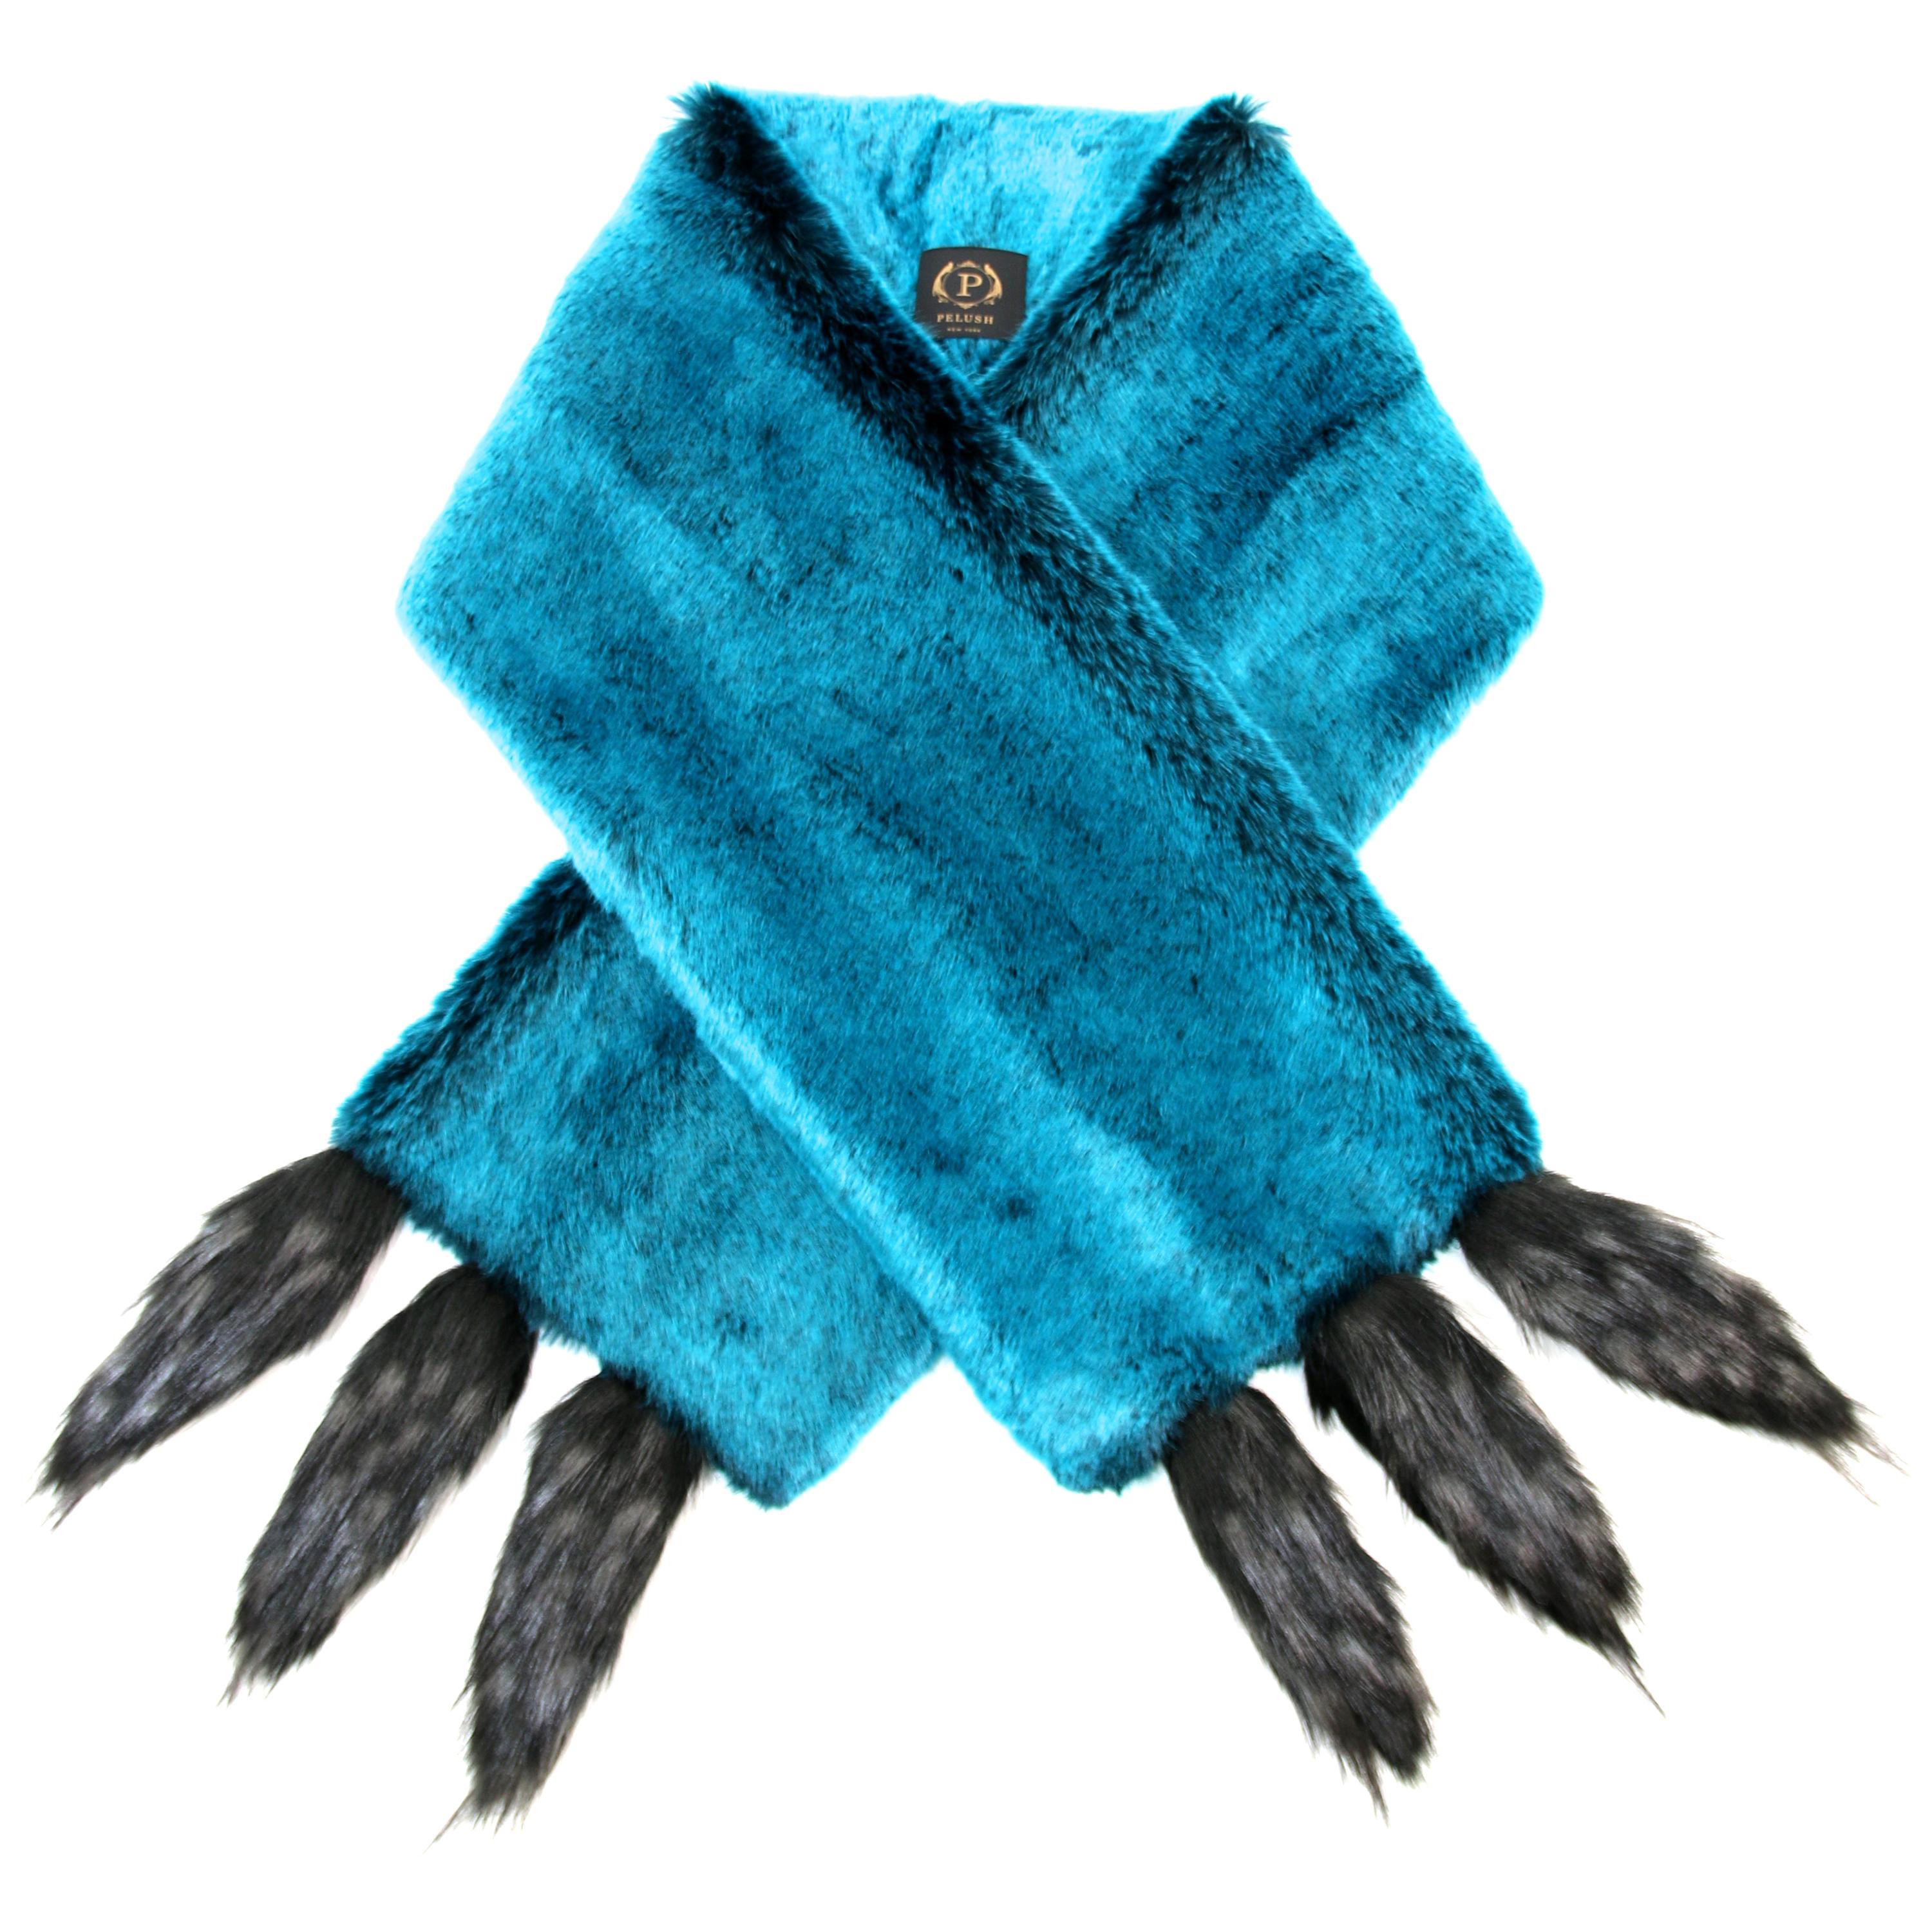 Pelush Teal Faux Fur Chinchilla Stole With Faux Fox Fringes - One Size For Sale